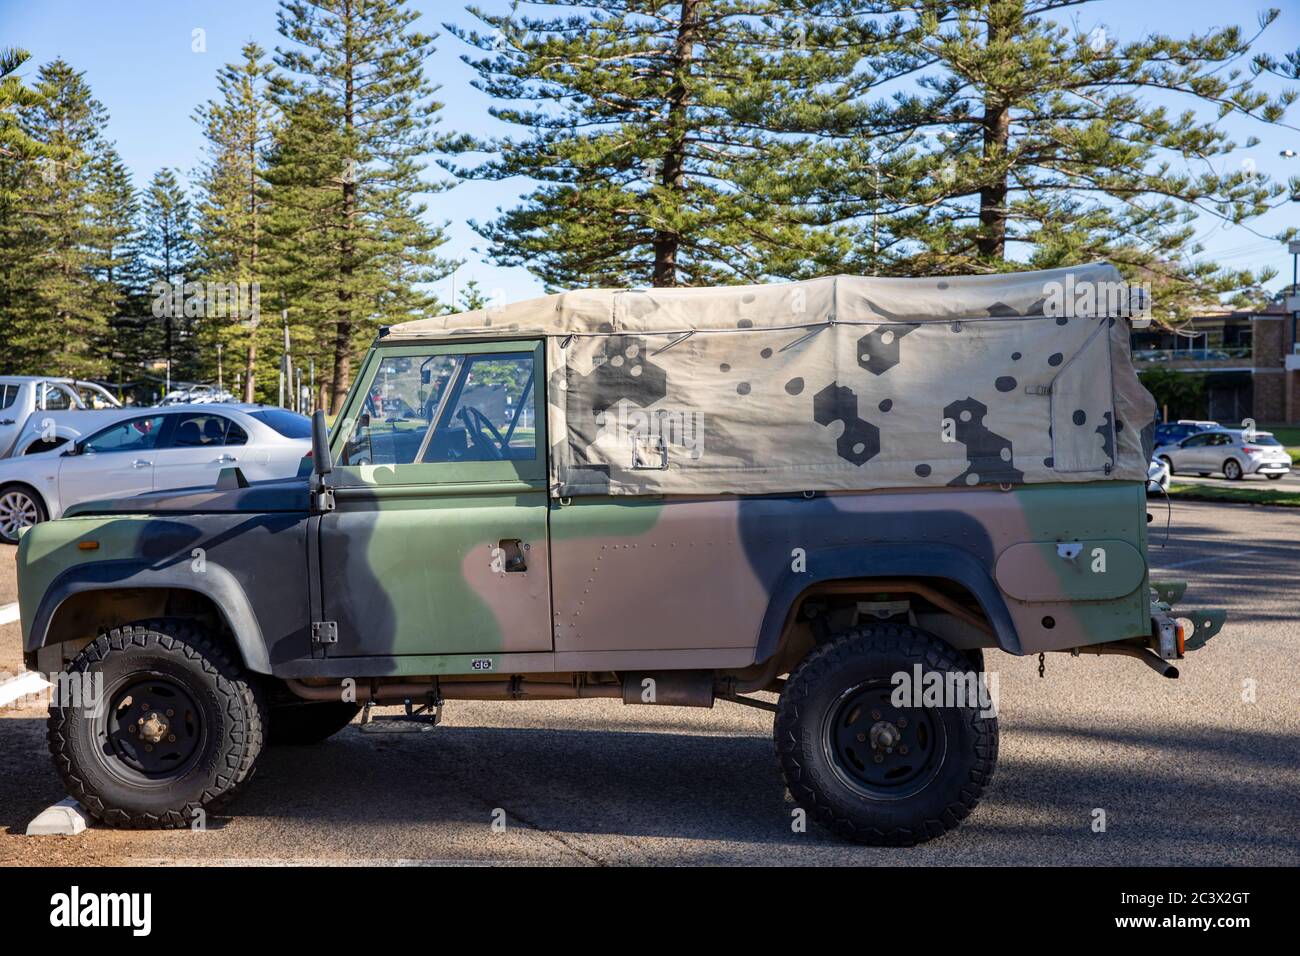 Land Rover defender soft top in camouflage in Sydney,Australia Stock Photo